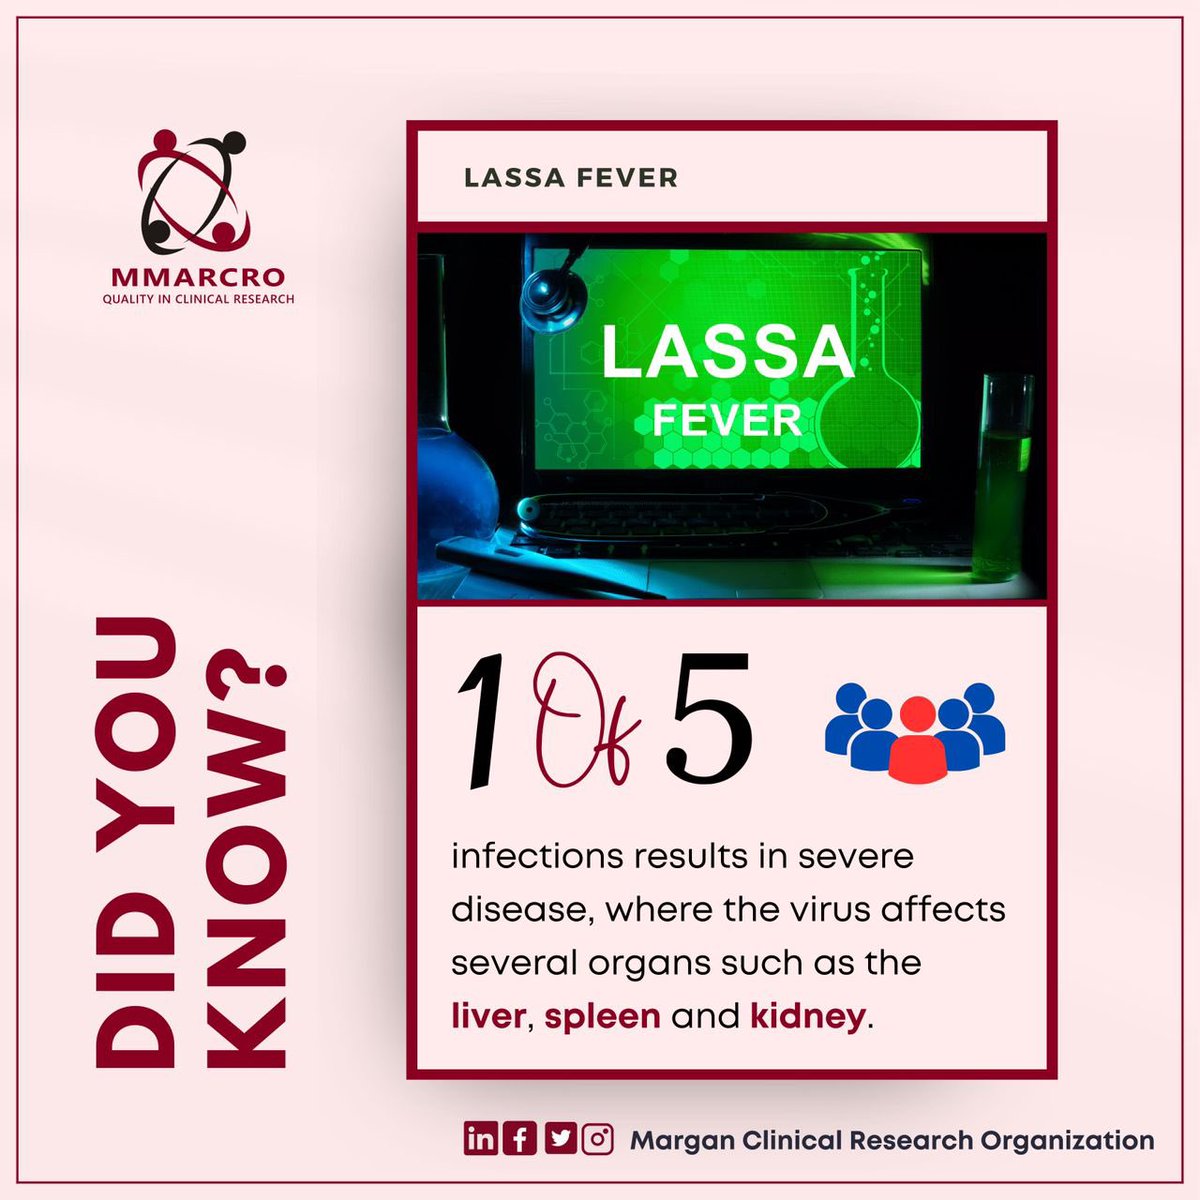 Did You Know?🤔
1 out of 5 Lassa fever infections results in severe disease, where the virus affects several organs such as the liver, spleen and kidney.

#mmarcro #margancro #lassafever #lassafeverawareness